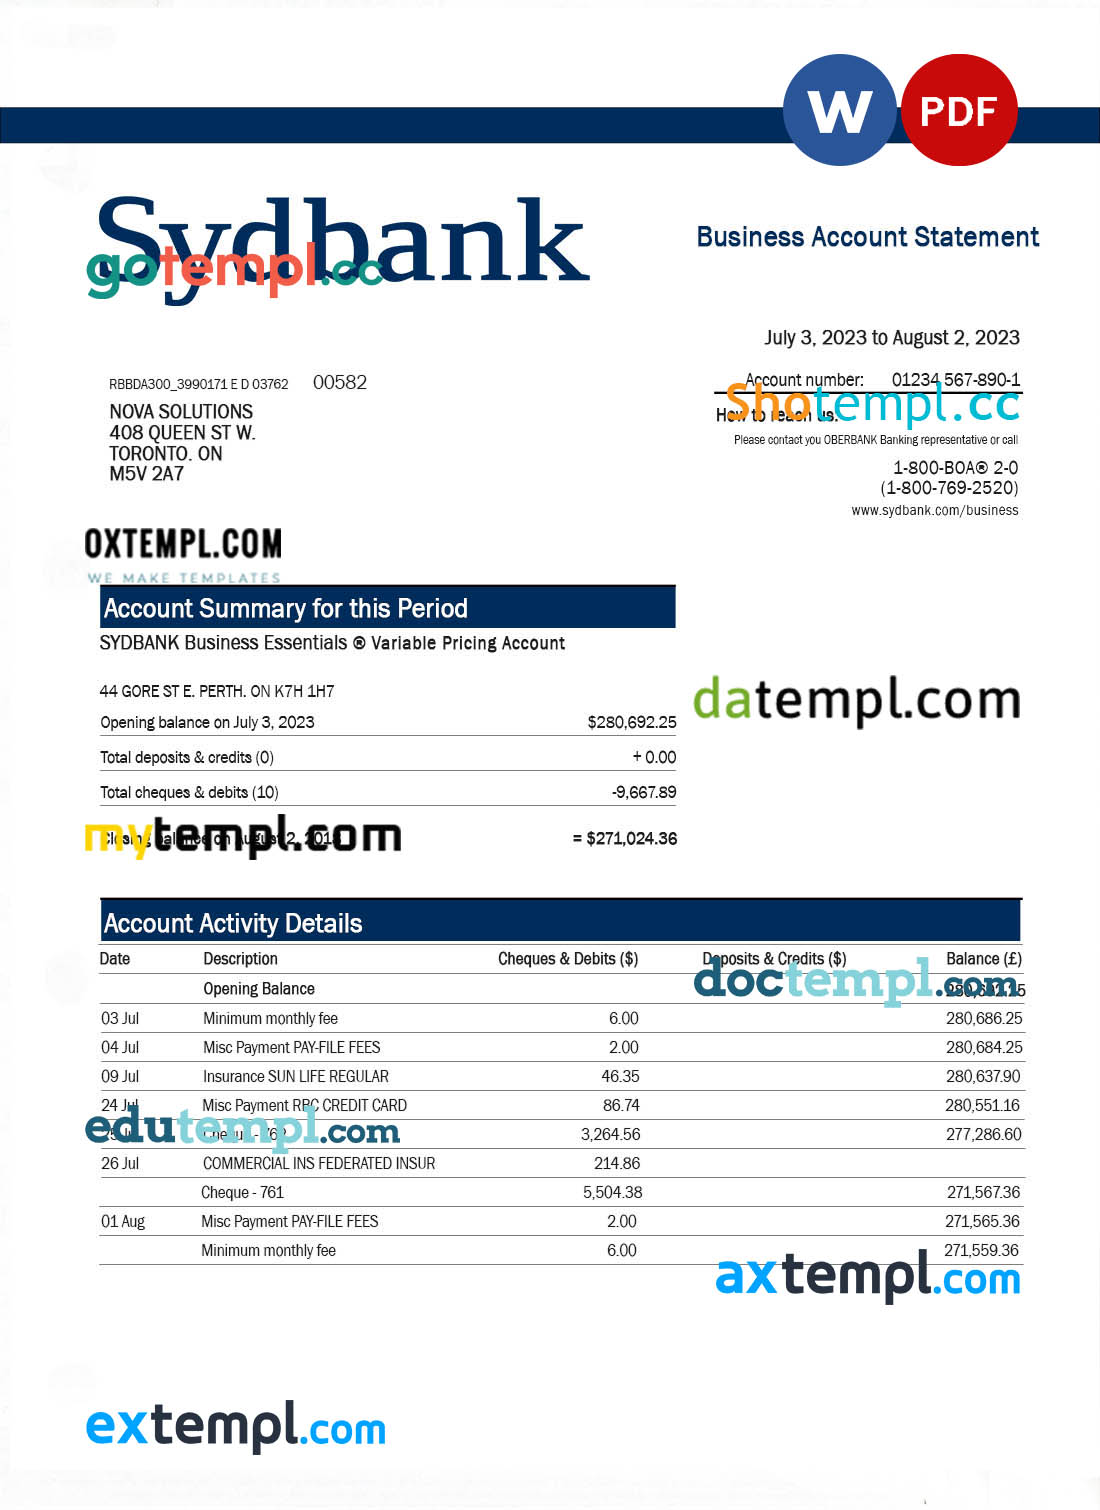 China Merchants bank firm account statement Word and PDF template